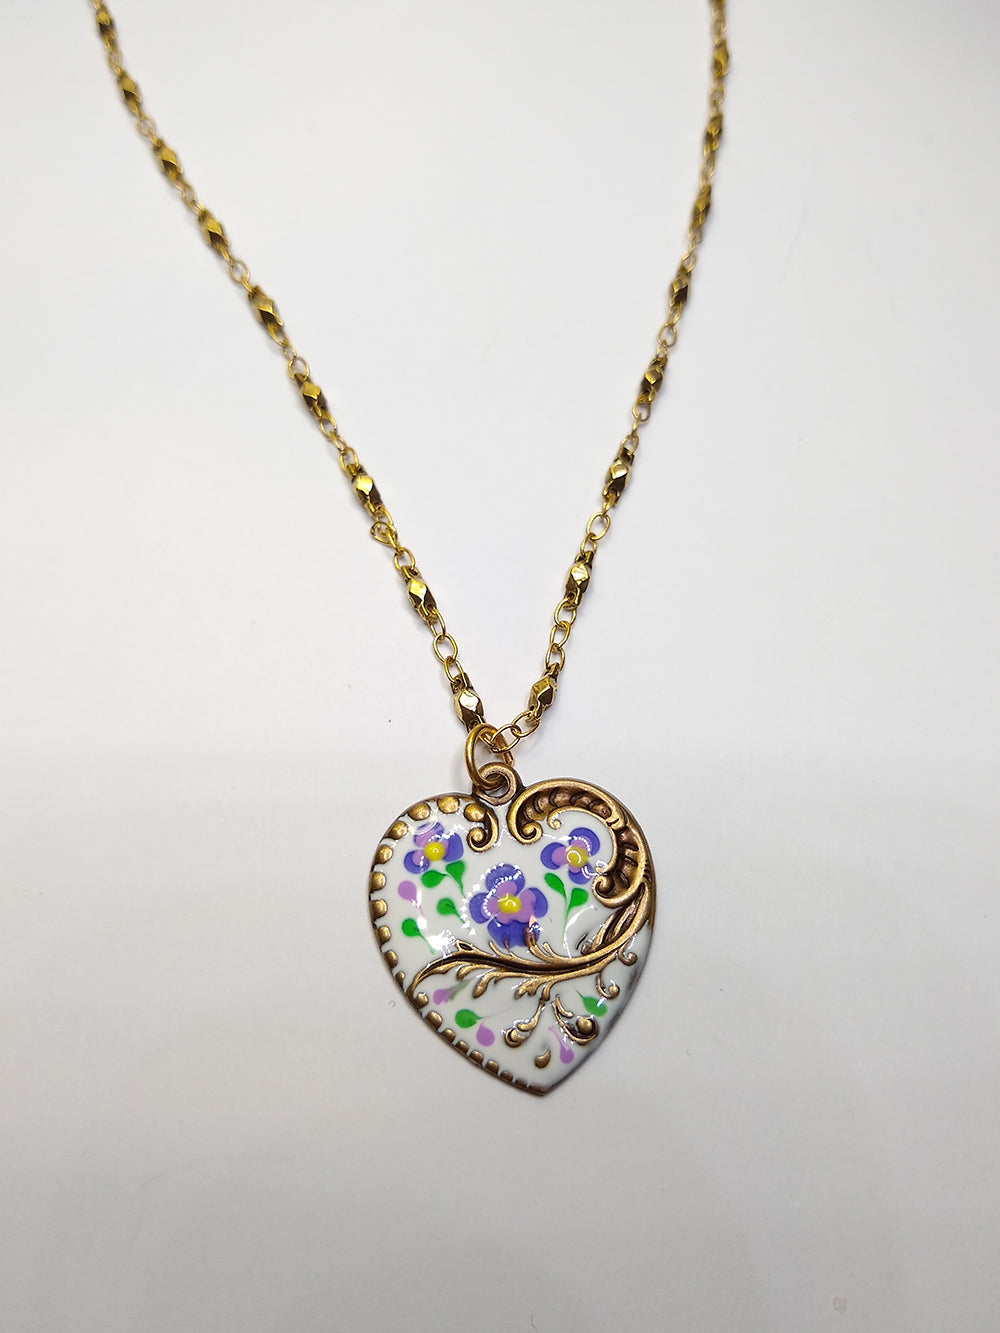 Brass and White Enamel Floral Heart Necklace